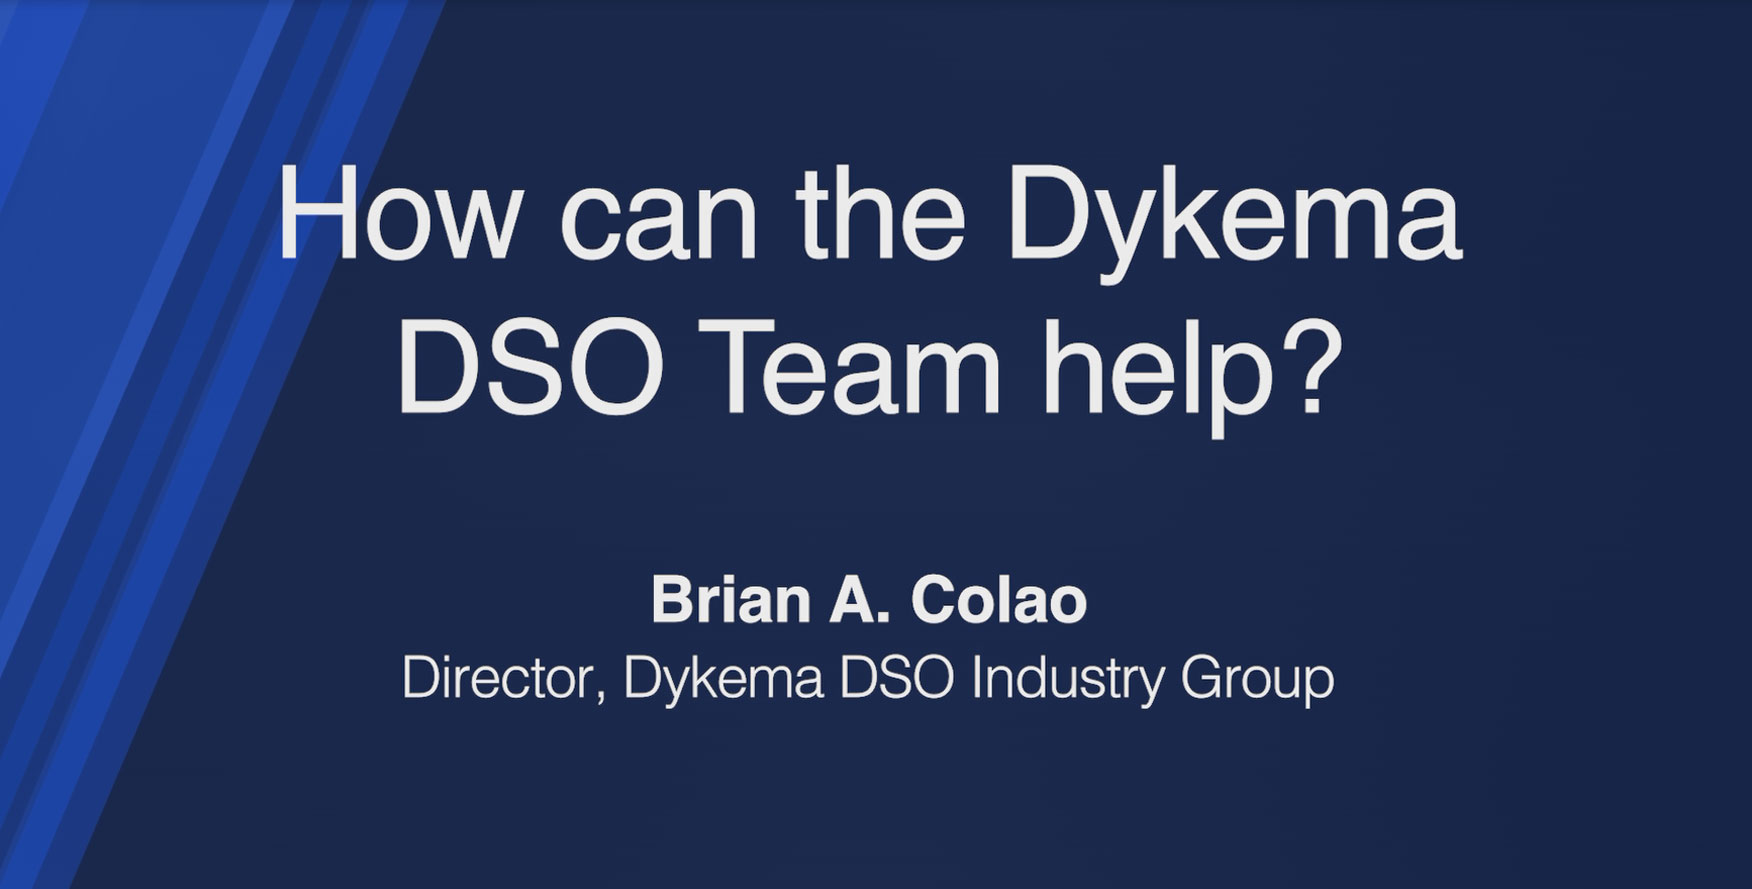 How can the Dykema DSO Team help?